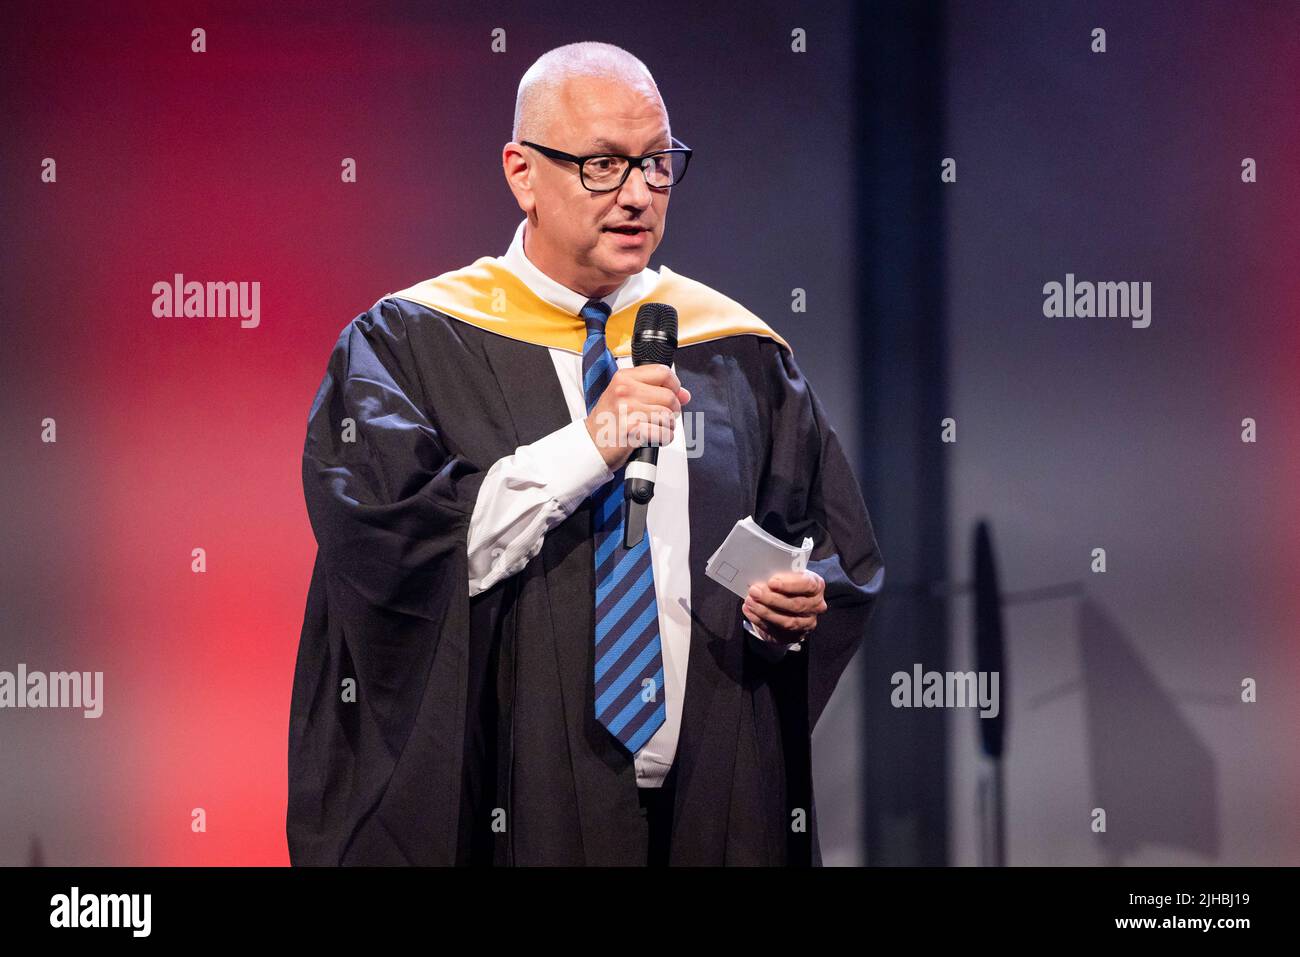 Graduation day at UA92, Manchester - 10th July 2022. Phil Jones, ex BBC now lecturer in sports journalism at UA92. Stock Photo